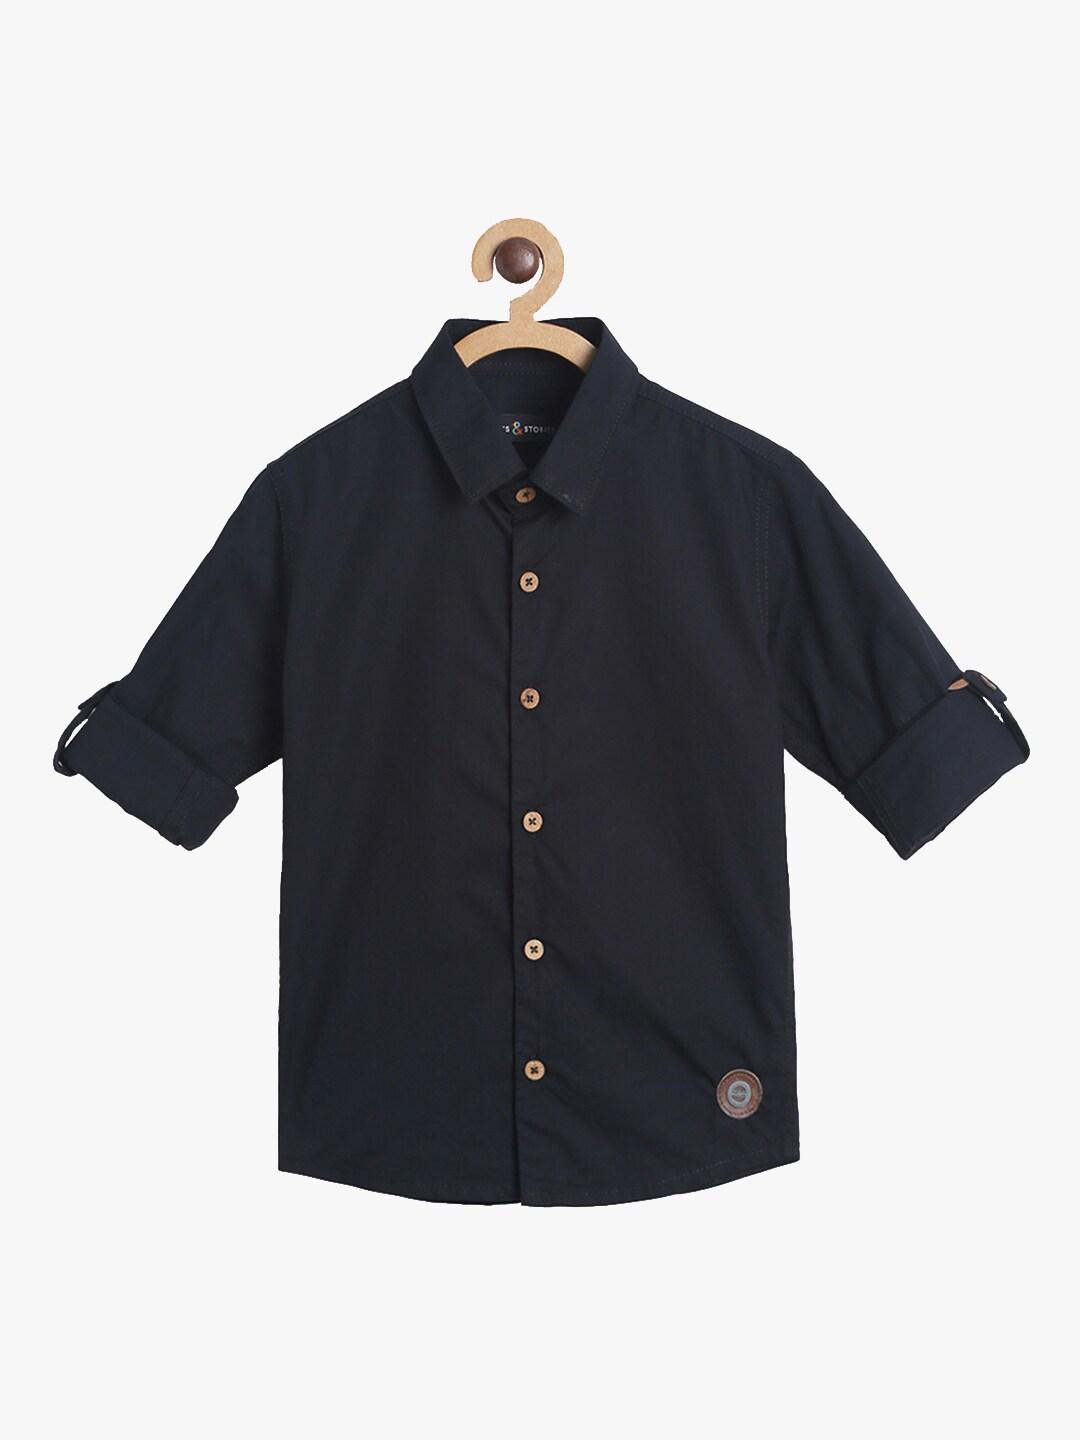 TALES & STORIES Boys Black Regular Fit Solid Casual Cotton Shirt